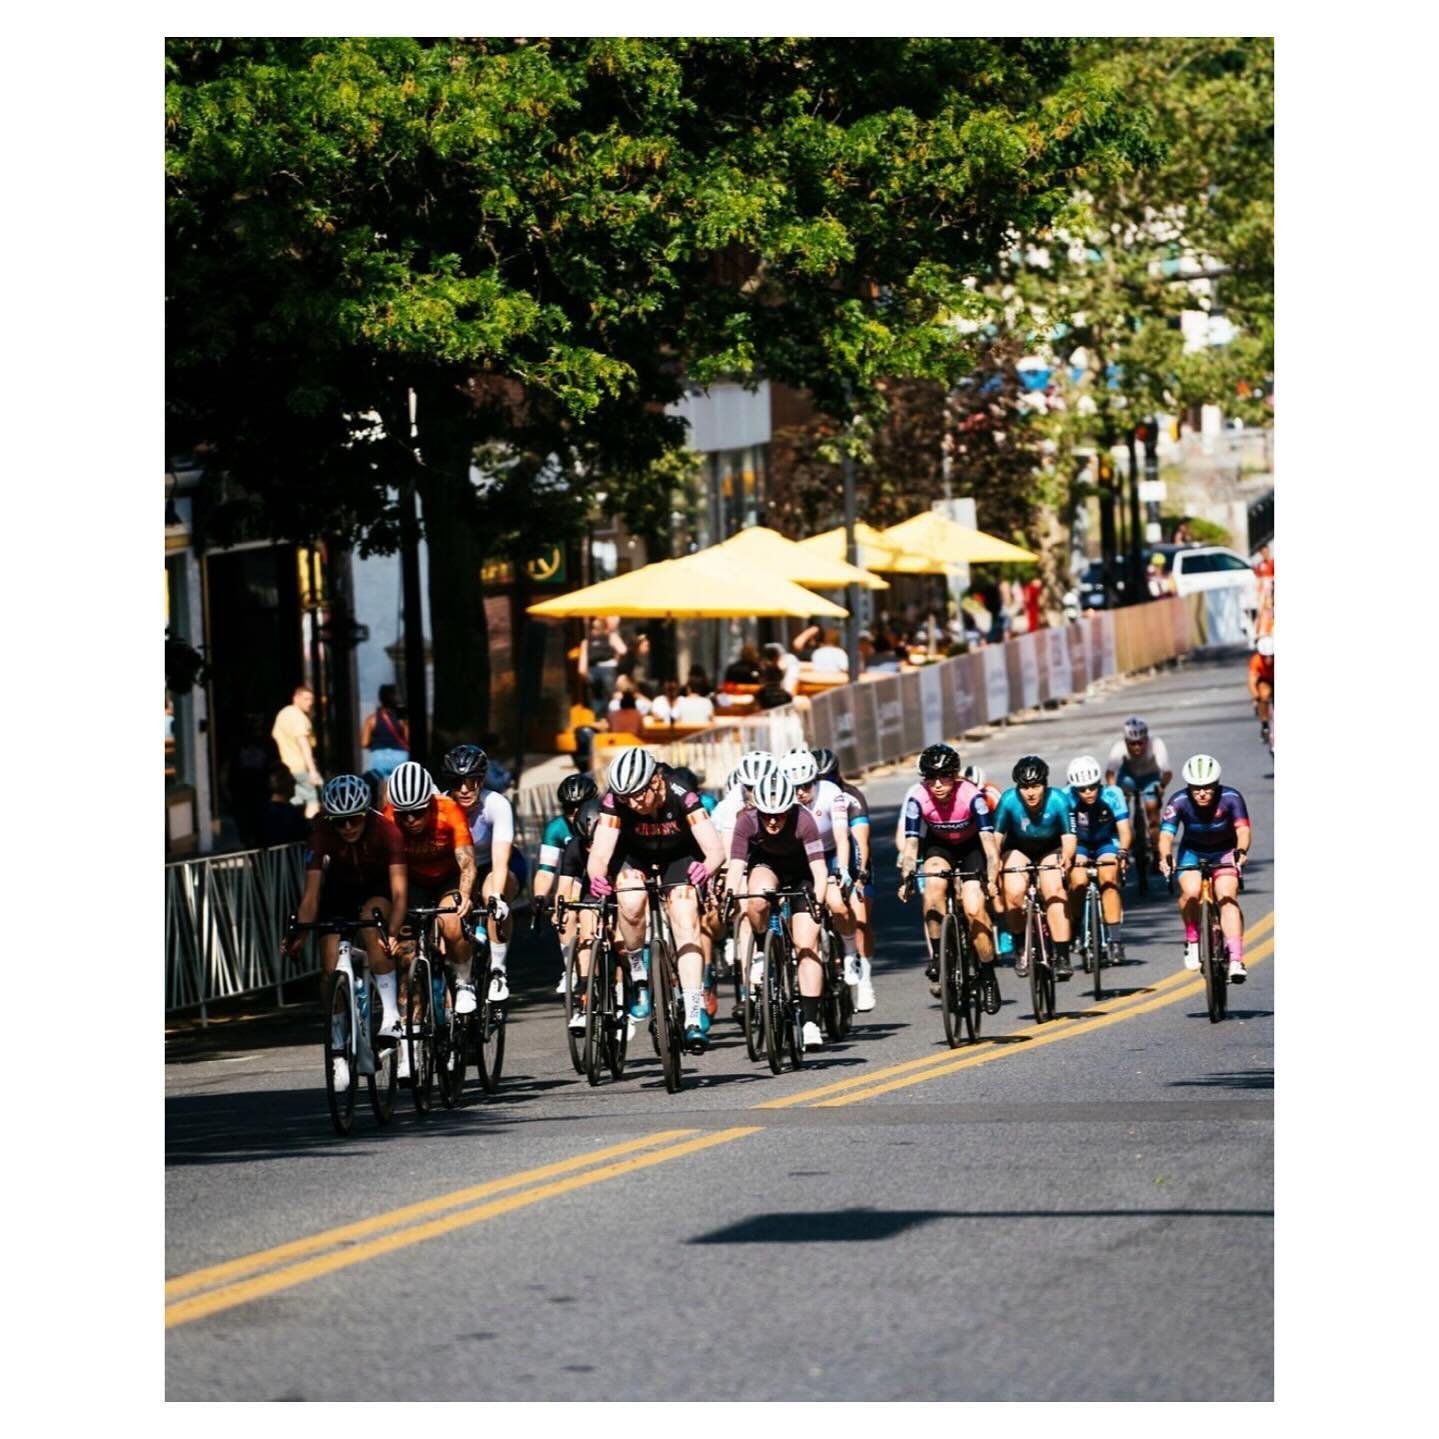 Join us in our pop-up beer garden this long weekend for Saturday&rsquo;s @eastontwilightcrit. For the uninitiated, downtown Easton transforms into a bike racing track for an afternoon and evening of very fast people on bikes, cowbells, spectators, wi